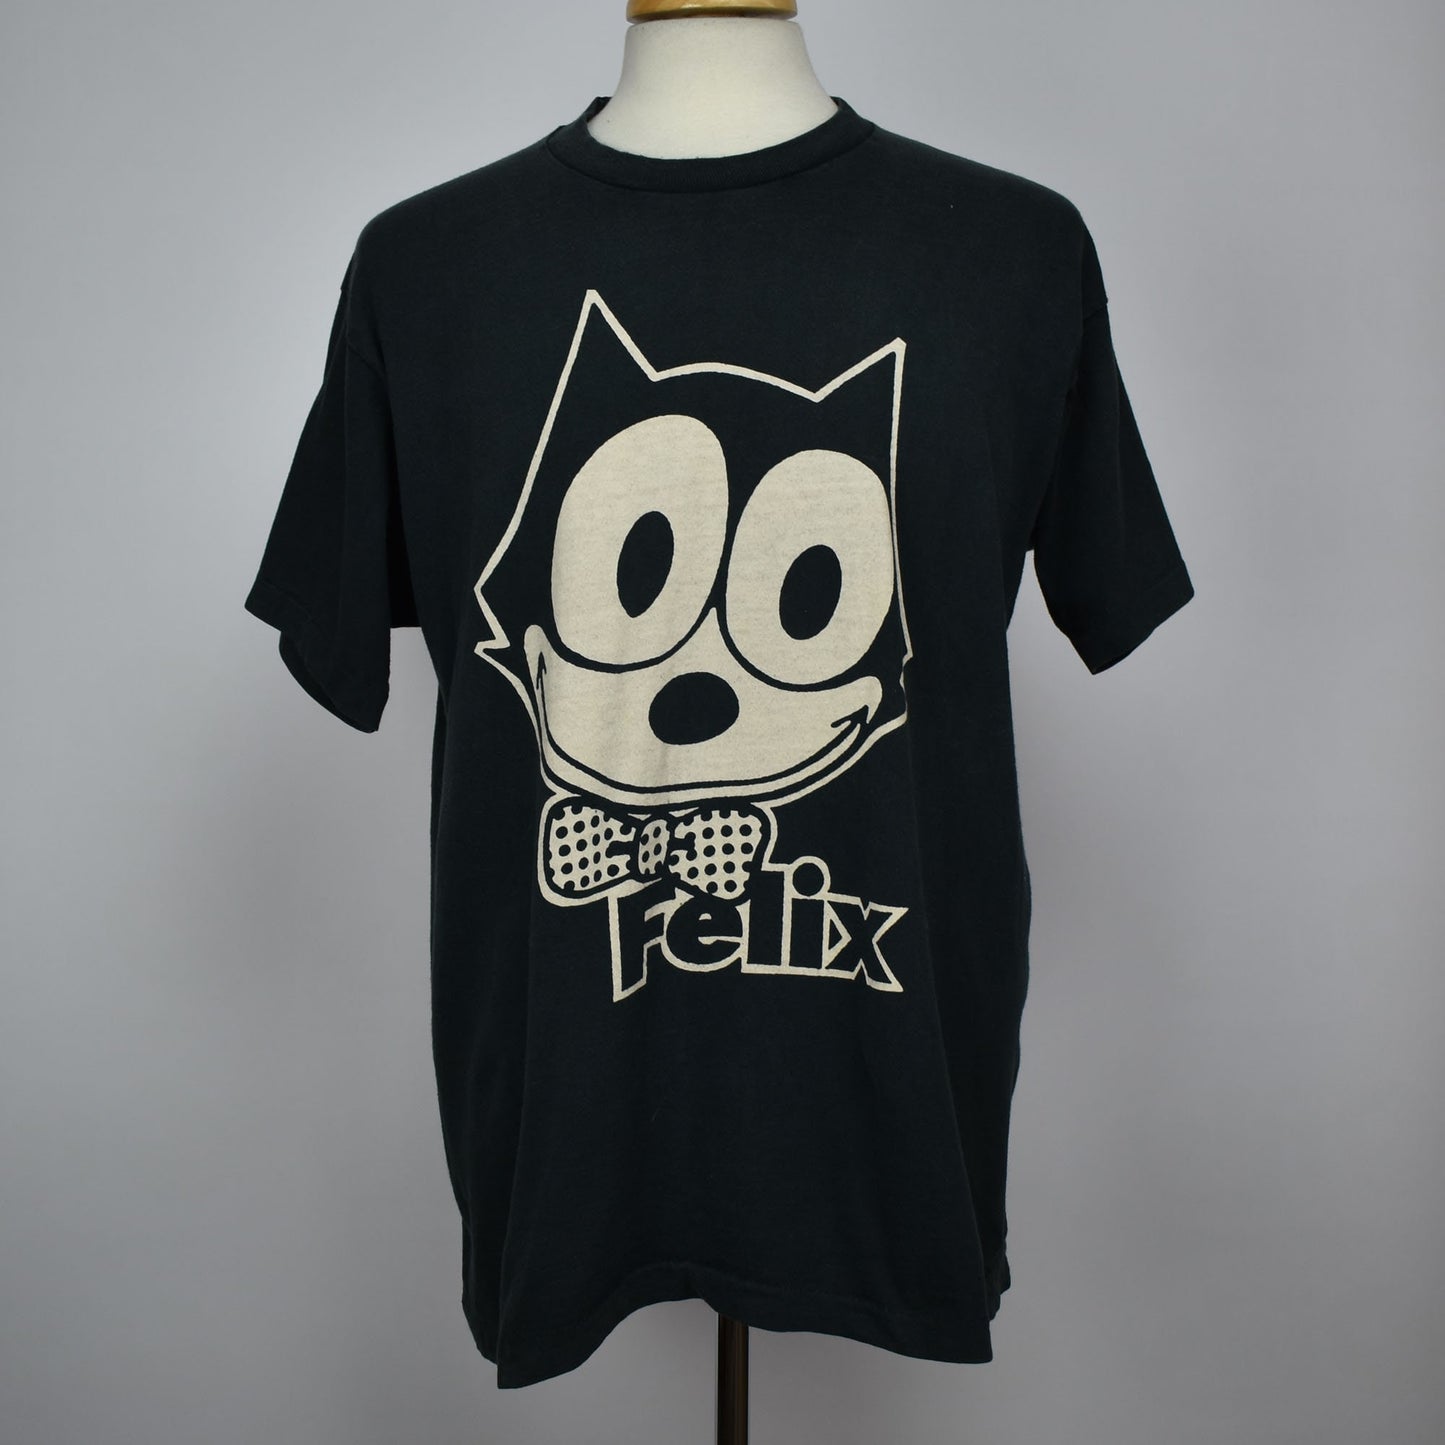 Vintage 90s Felix The Cat T-shirt - One Size Fits All - Single Stitch - Made in USA